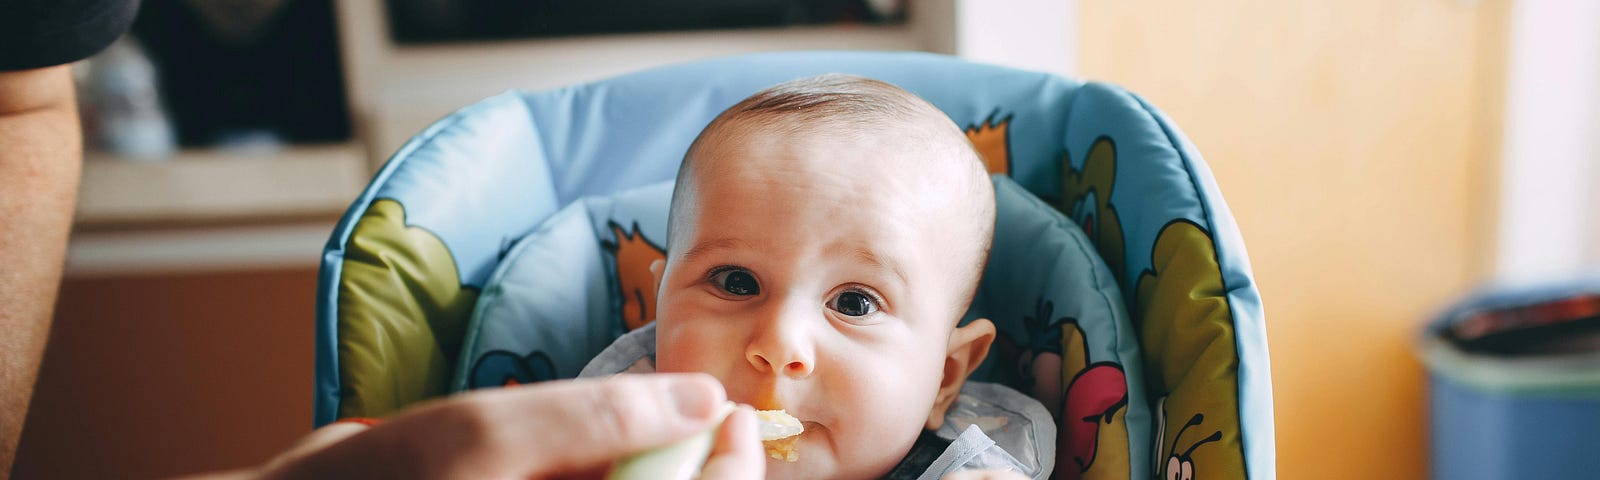 little baby eating yummy food from spoon